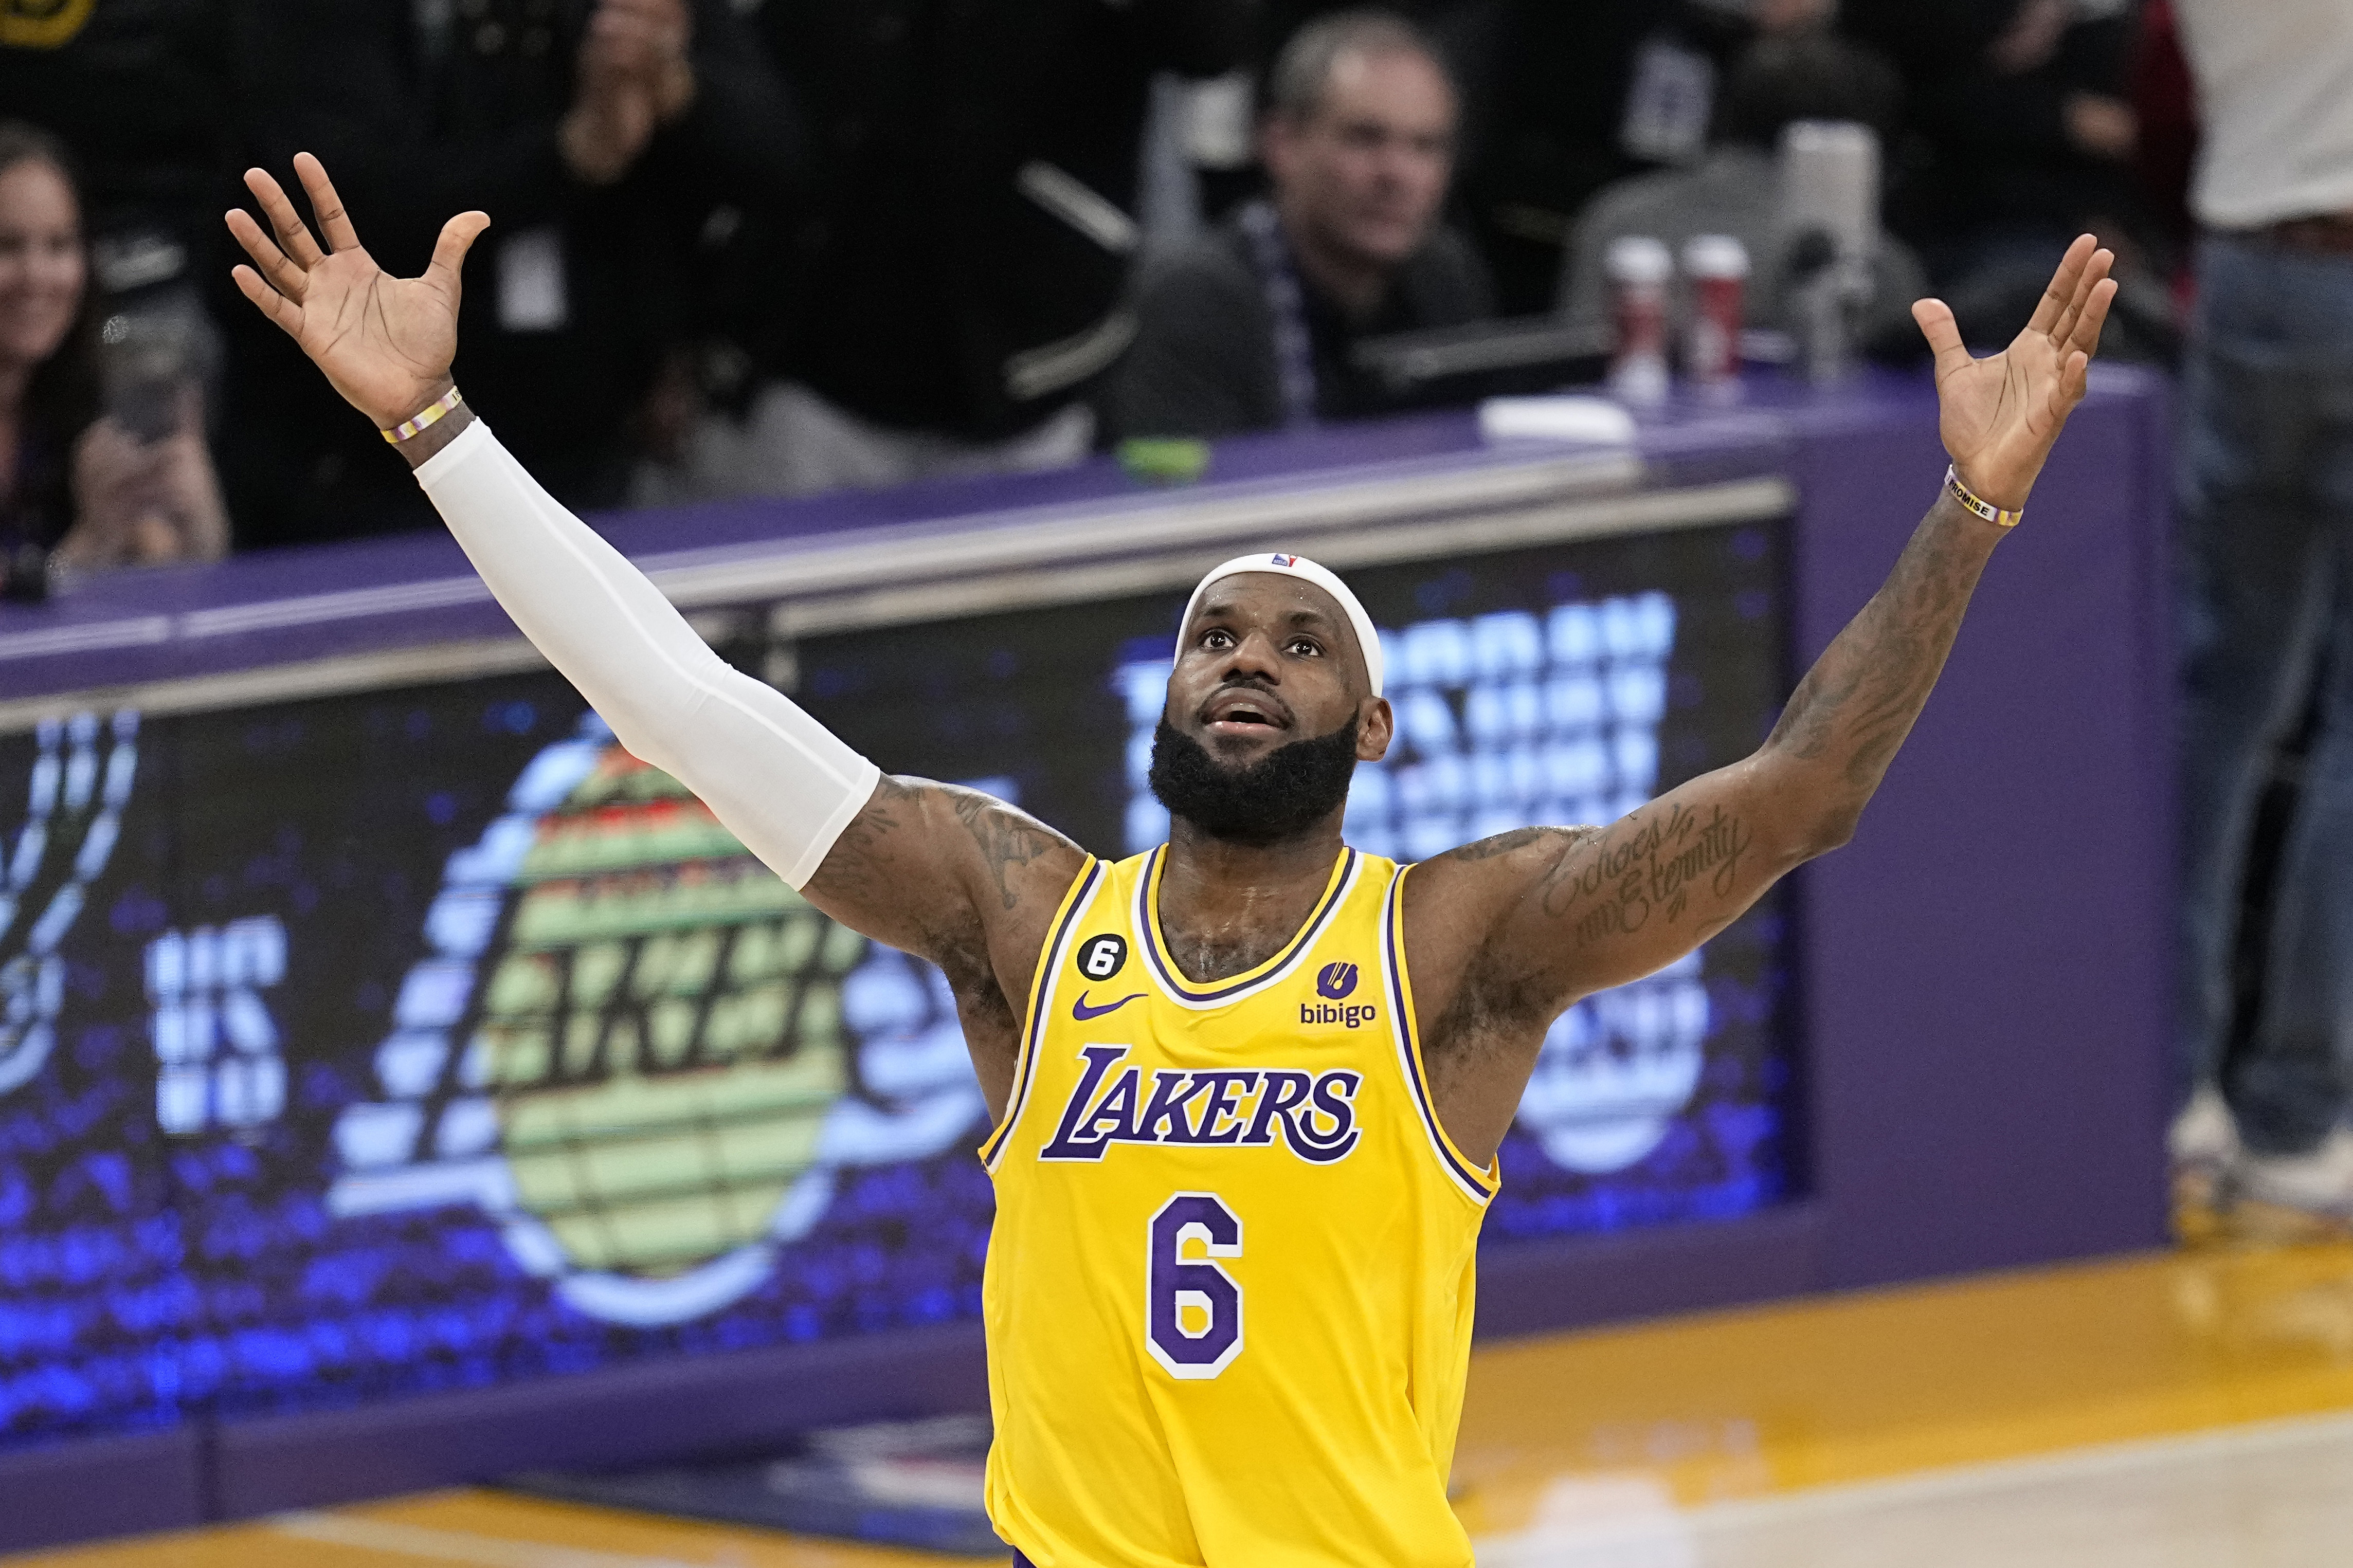 LEBRON JAMES IS NOW THE HIGHEST PAID NBA PLAYER EVER AFTER